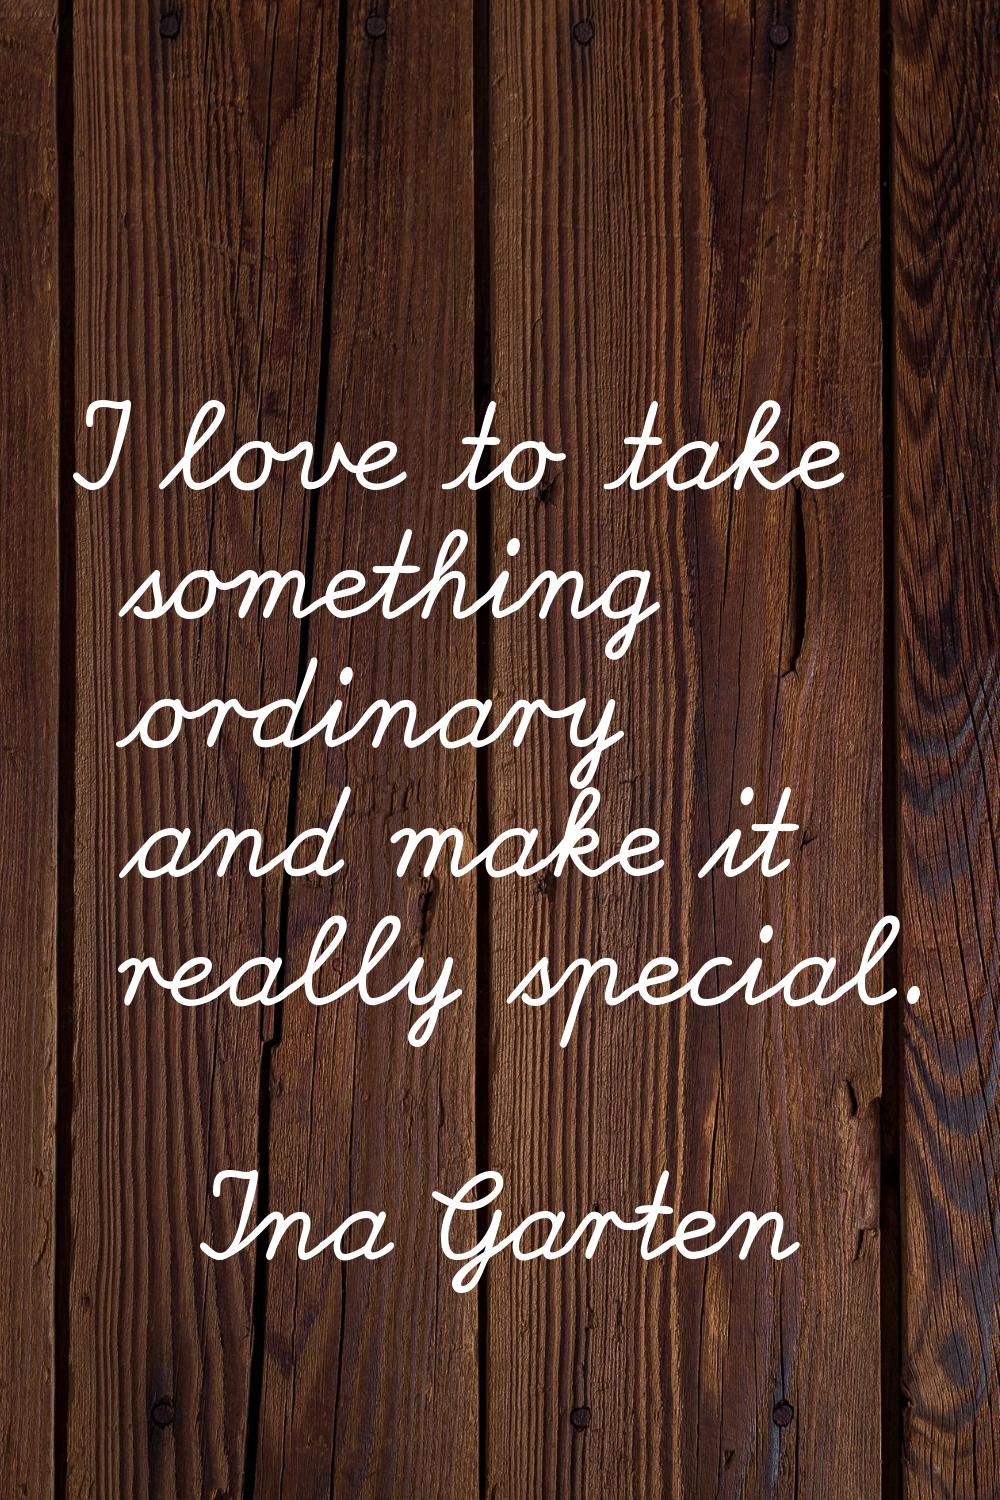 I love to take something ordinary and make it really special.